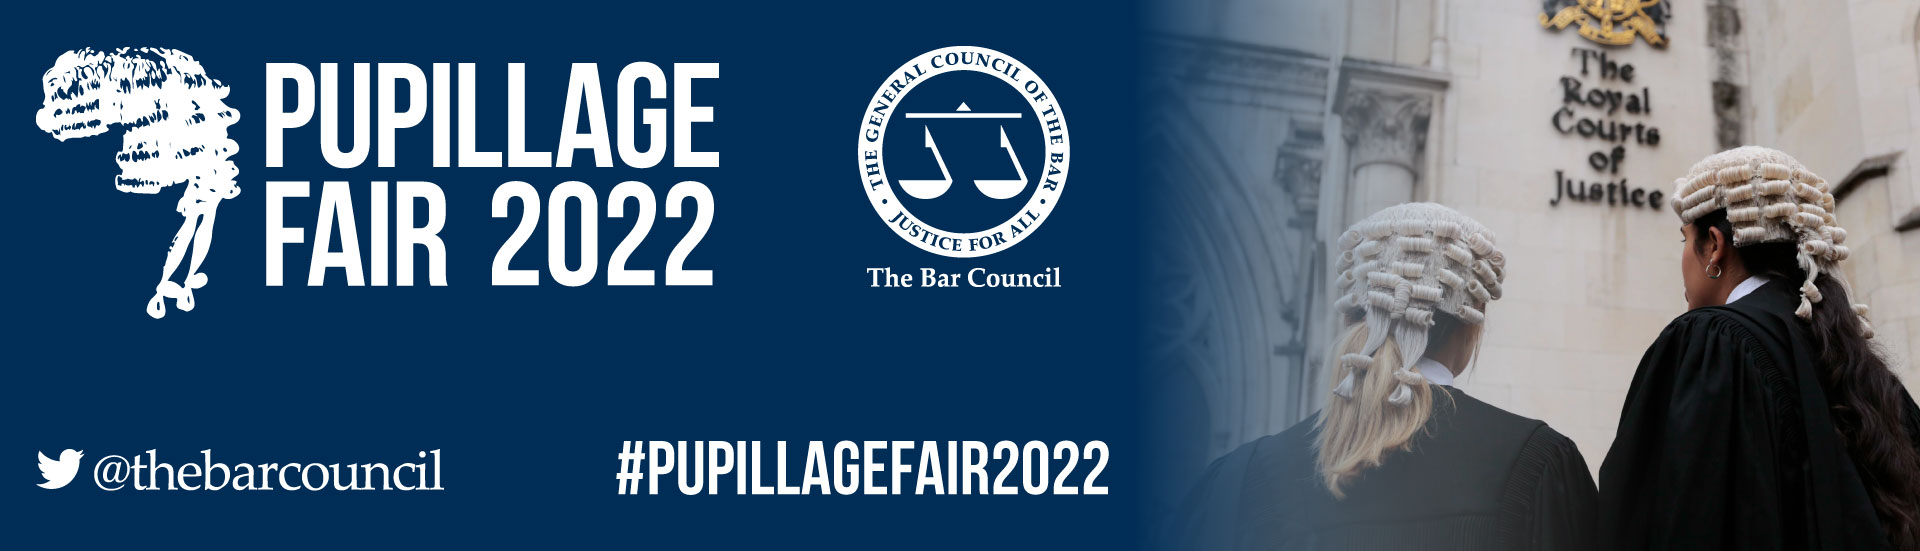 Banner with text over blue fading lighter to a man in barrister's wig and gown: Pupillage Fair 2022, Twitter @barcouncil #PupillageFair2022